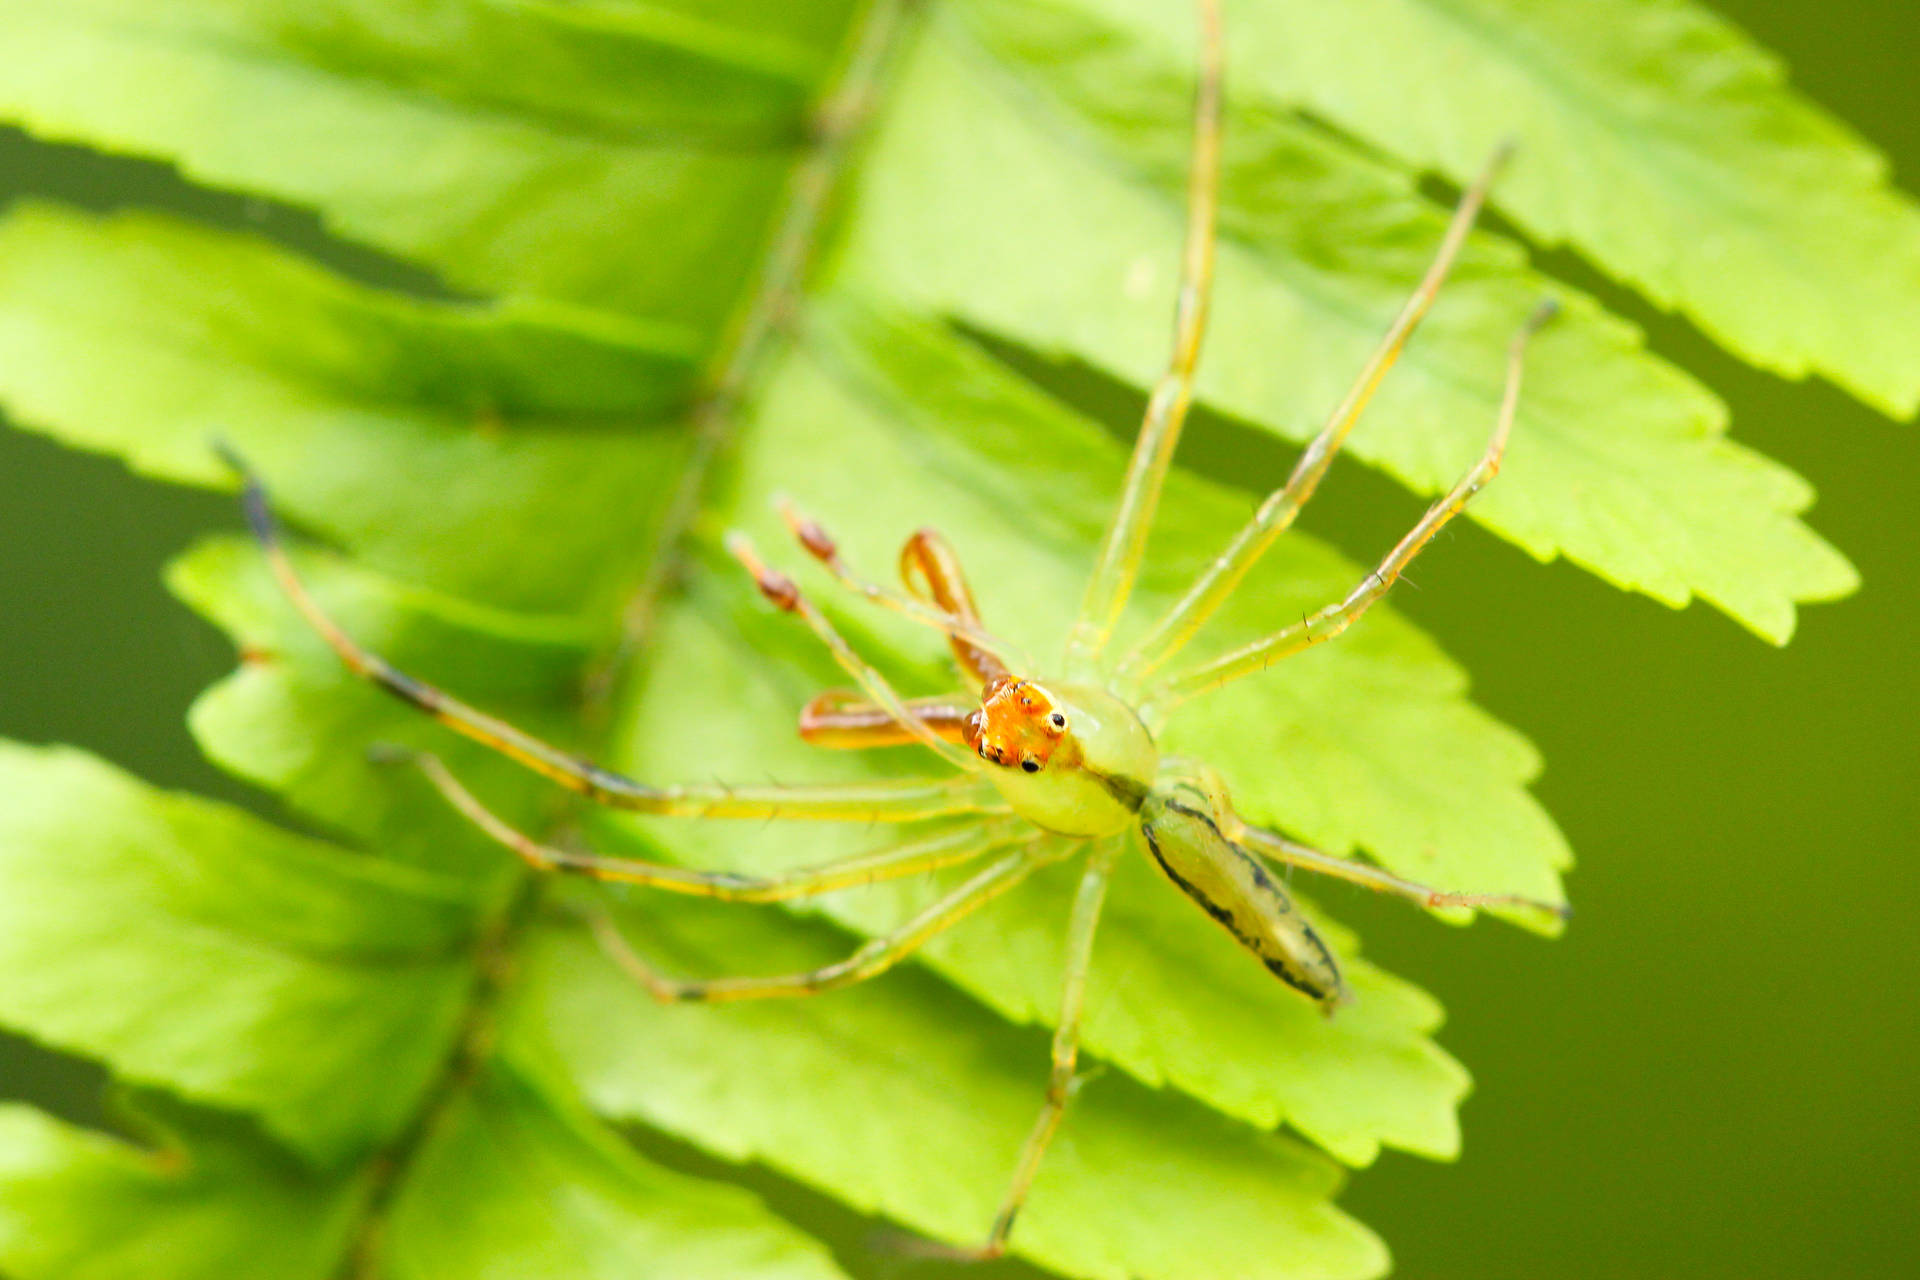 Spider Camouflaging On Green Leaf